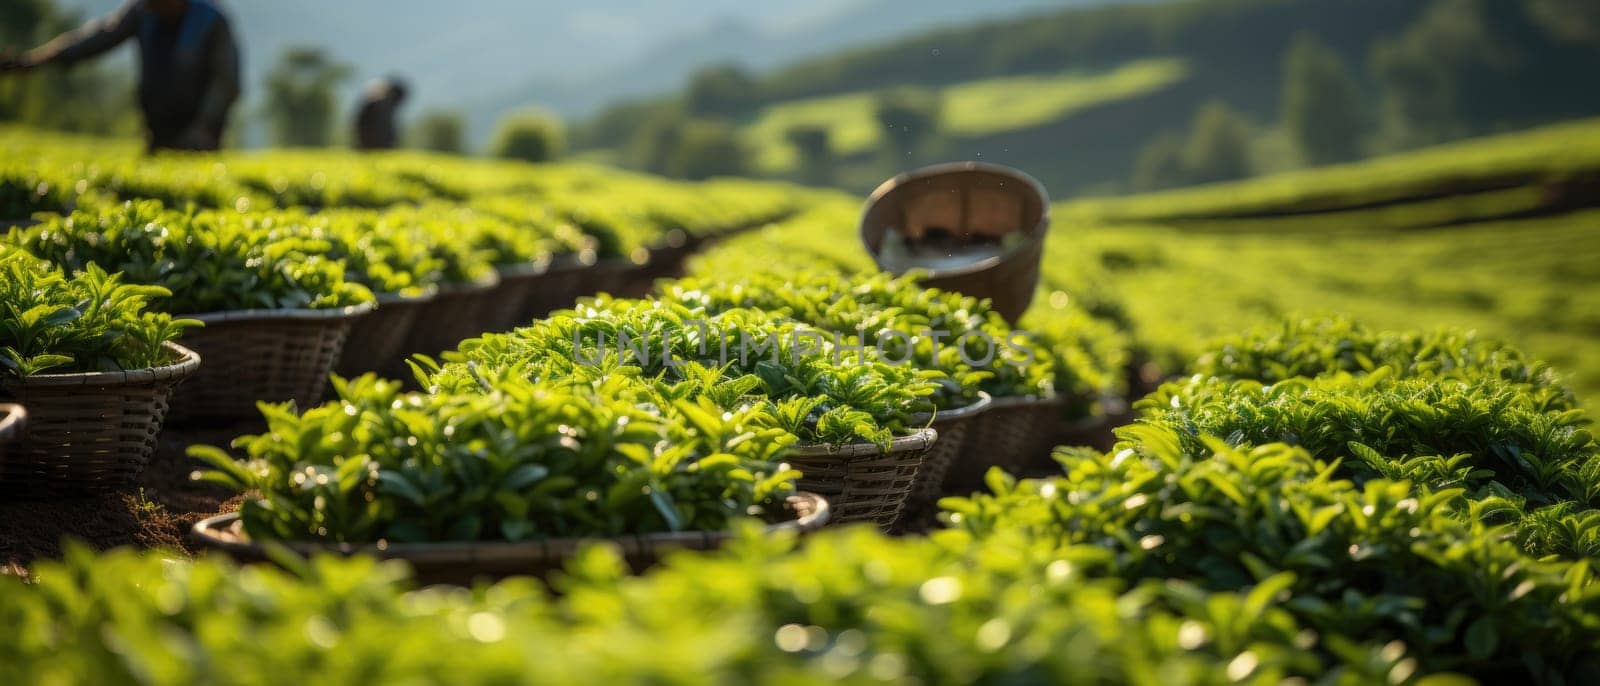 A picturesque scene capturing farmers diligently plucking tea leaves on a vibrant, lush green tea plantation amidst the breathtaking natural beauty of the landscape on a beautiful sunny day.